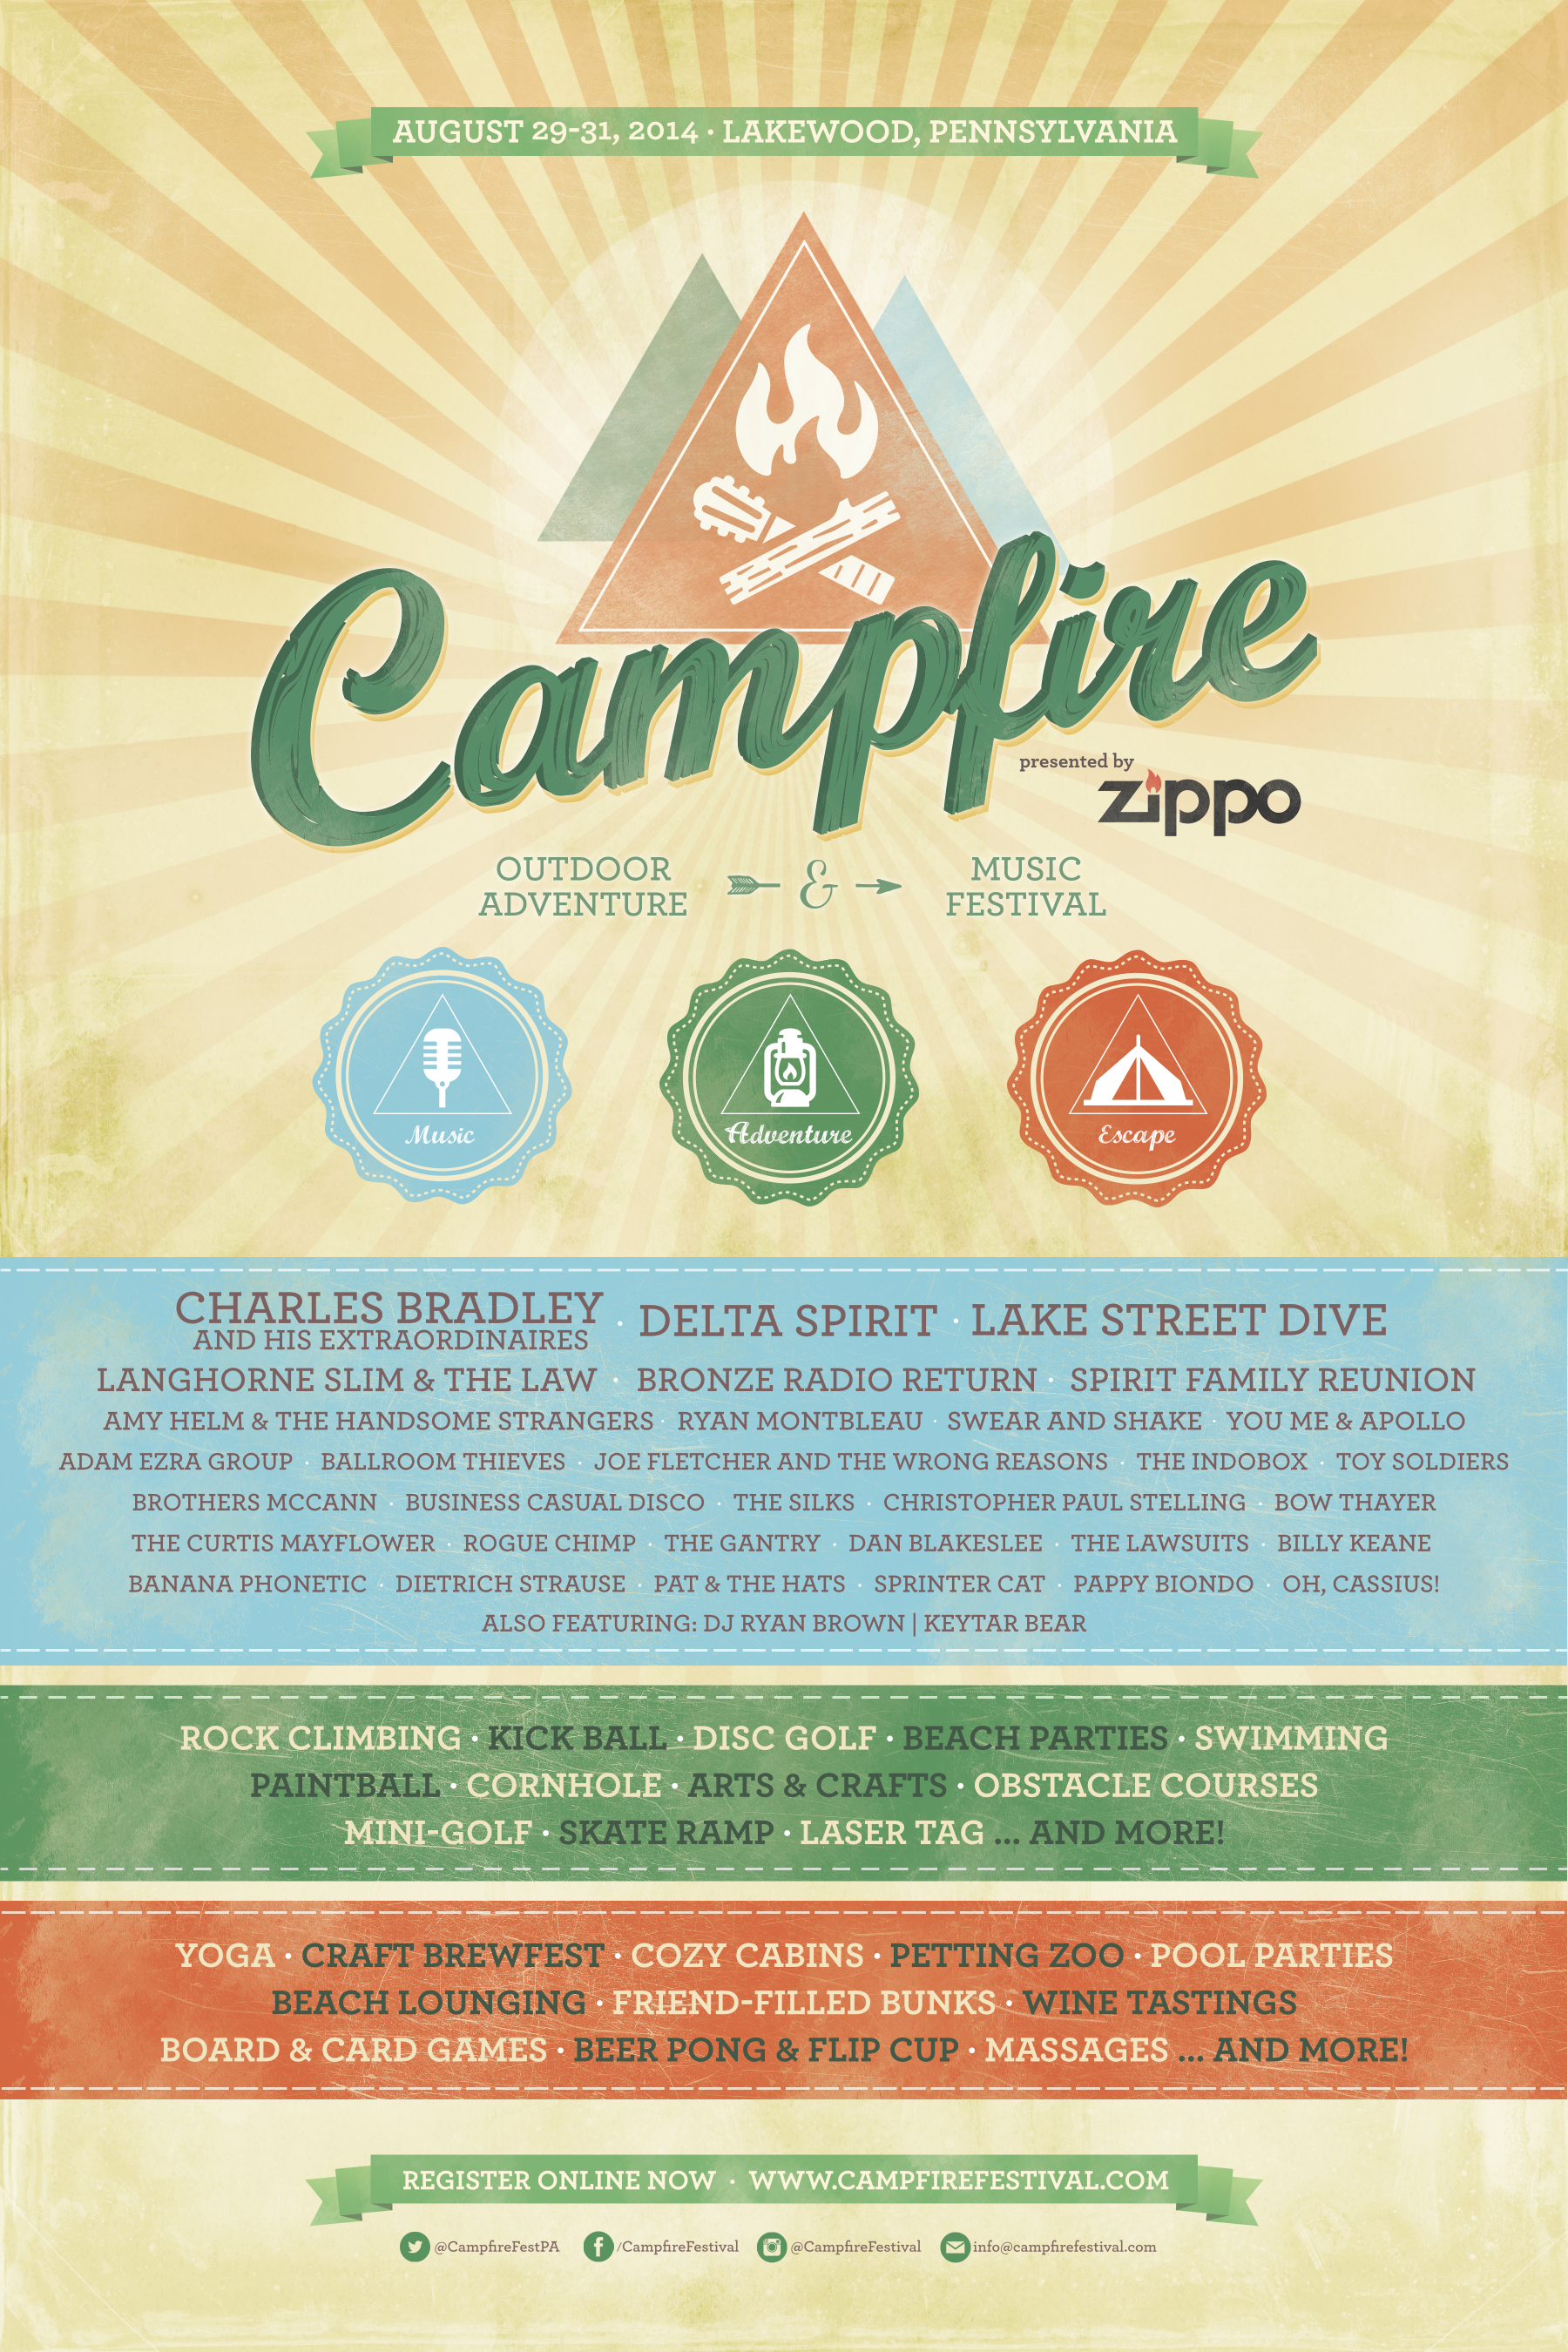 Campfire Outdoor Adventure and Music Festival Announces Fall Lineup